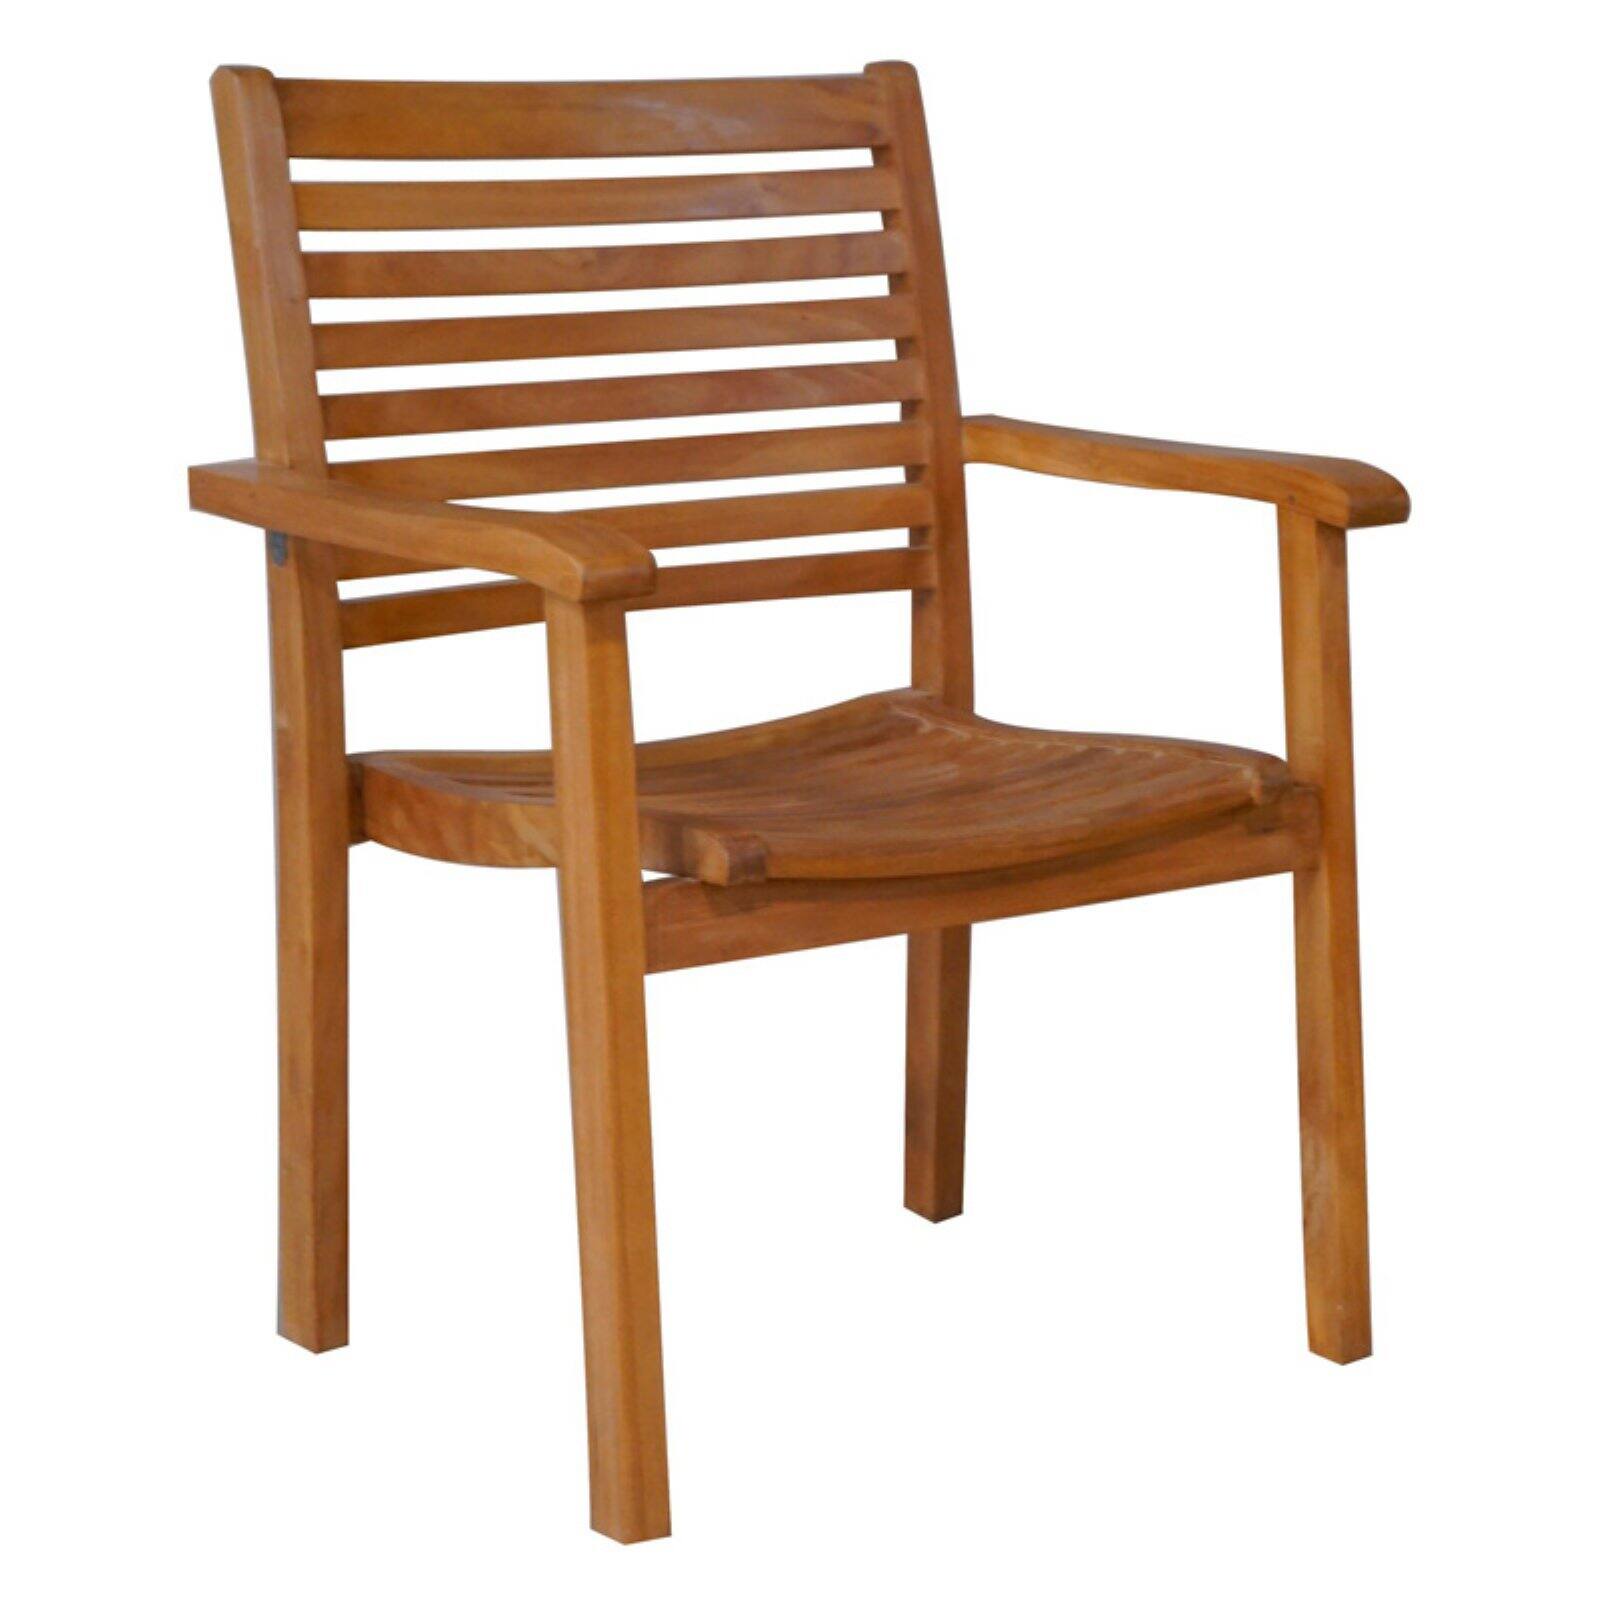 Chic Teak Italy Teak Stacking Patio Dining Chair - image 2 of 7